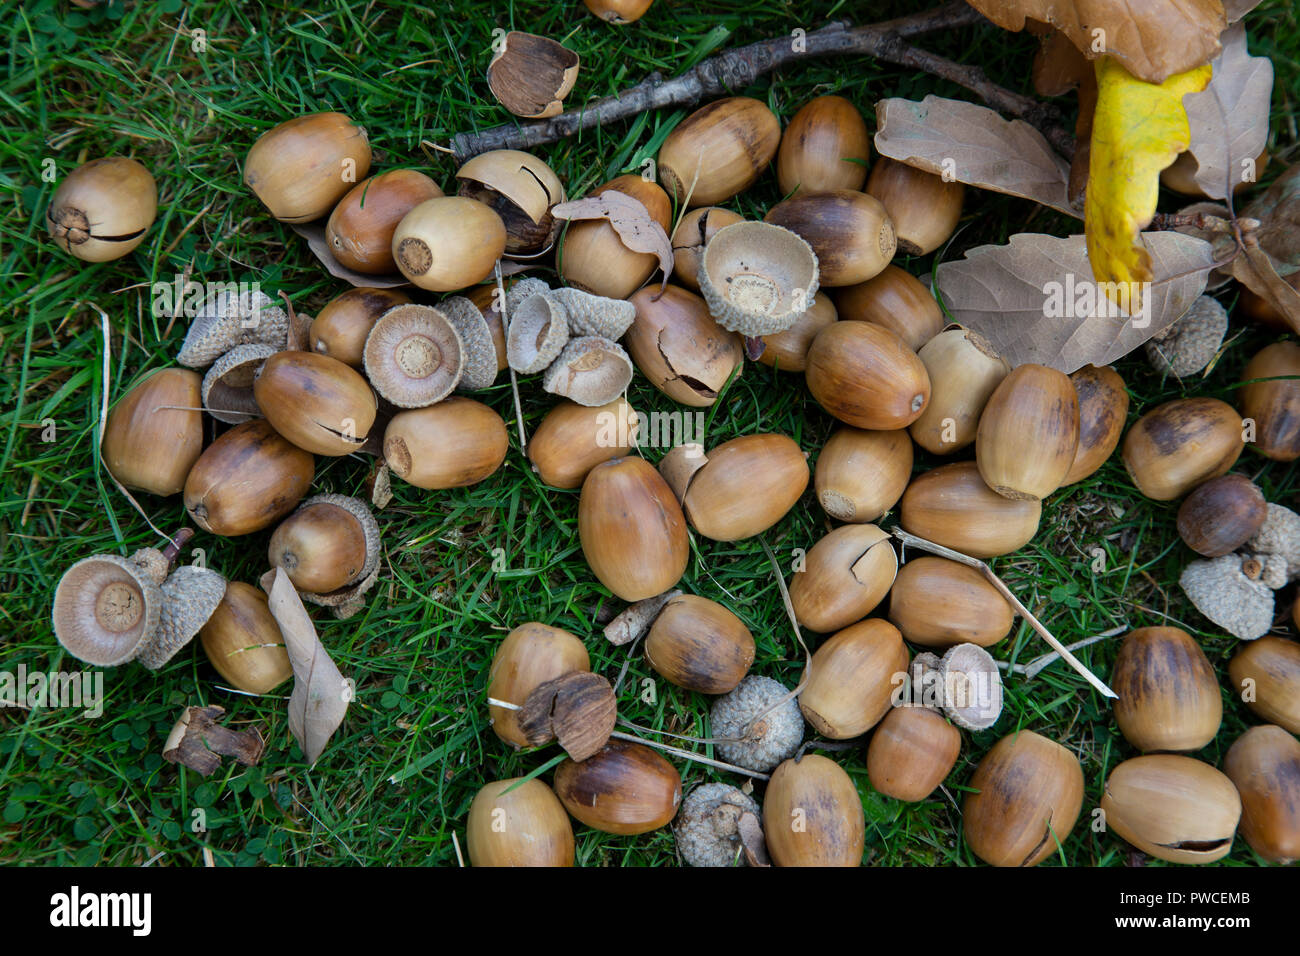 Acorns or Oak nuts, the nuts of Oak trees having fallen from the tree in the Autumn and randomly distributed on the grass below Stock Photo